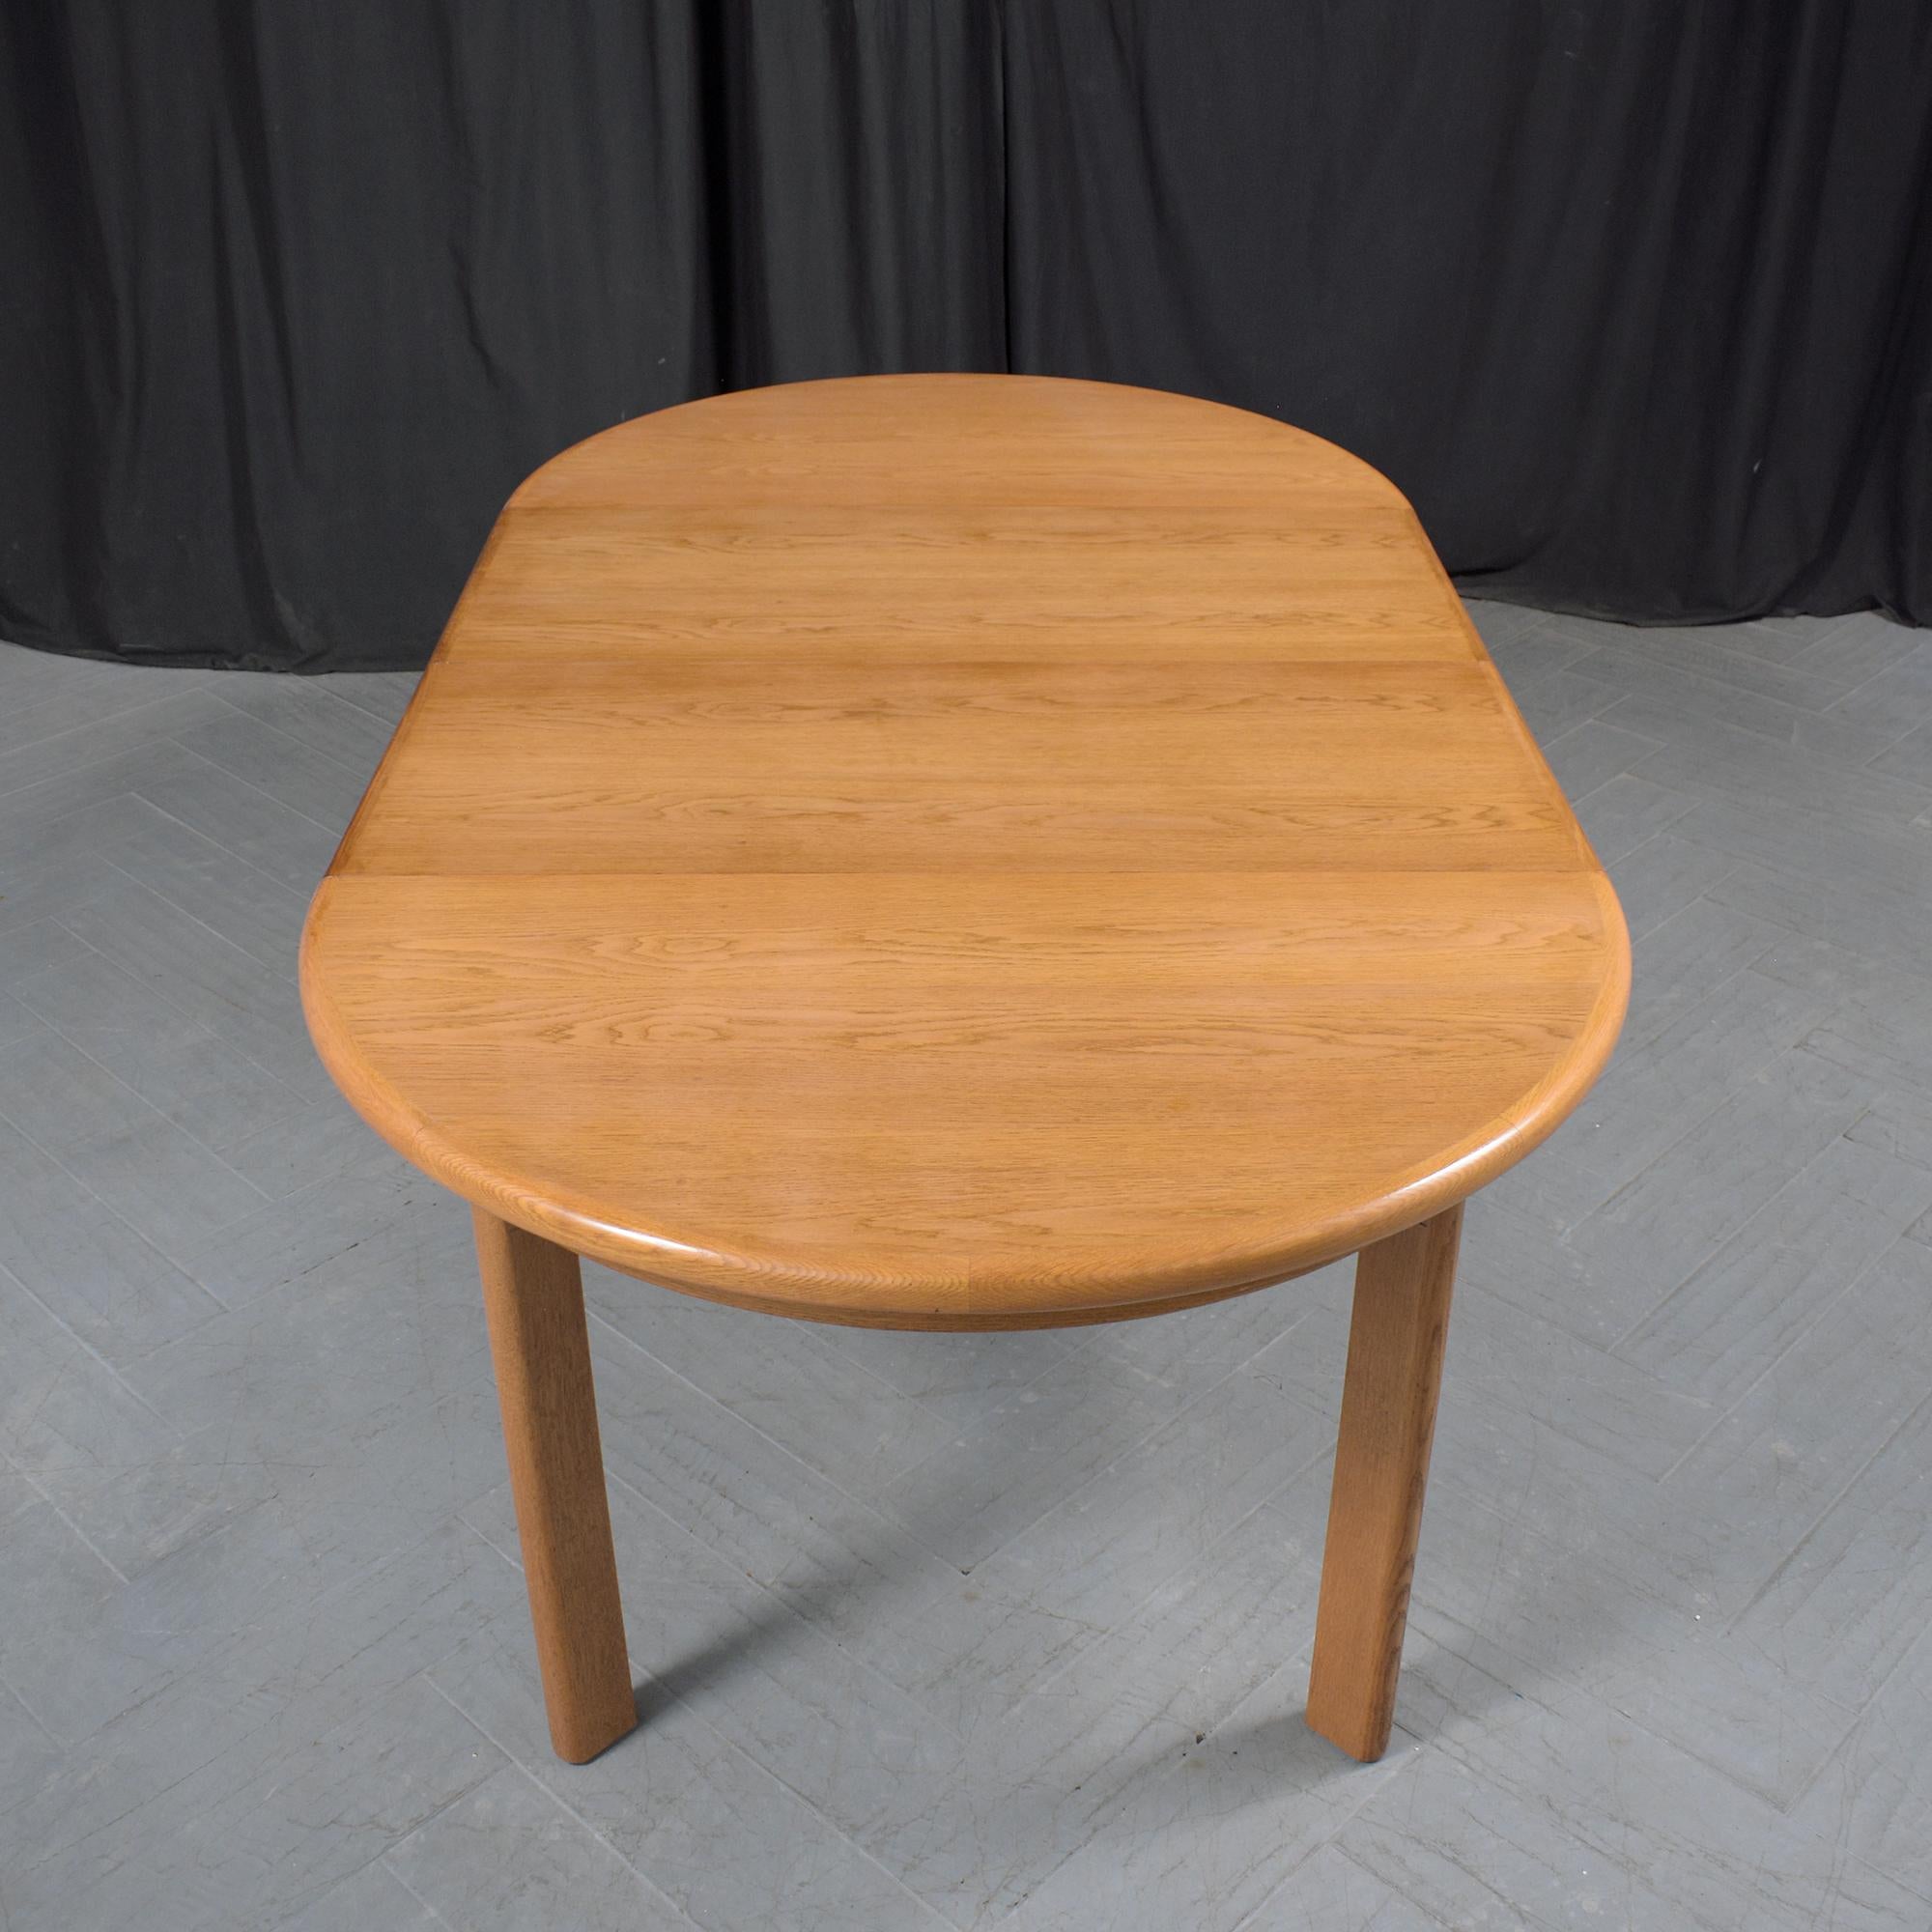 1970s Danish Modern Teak Dining Table with Extendable Leaves For Sale 6